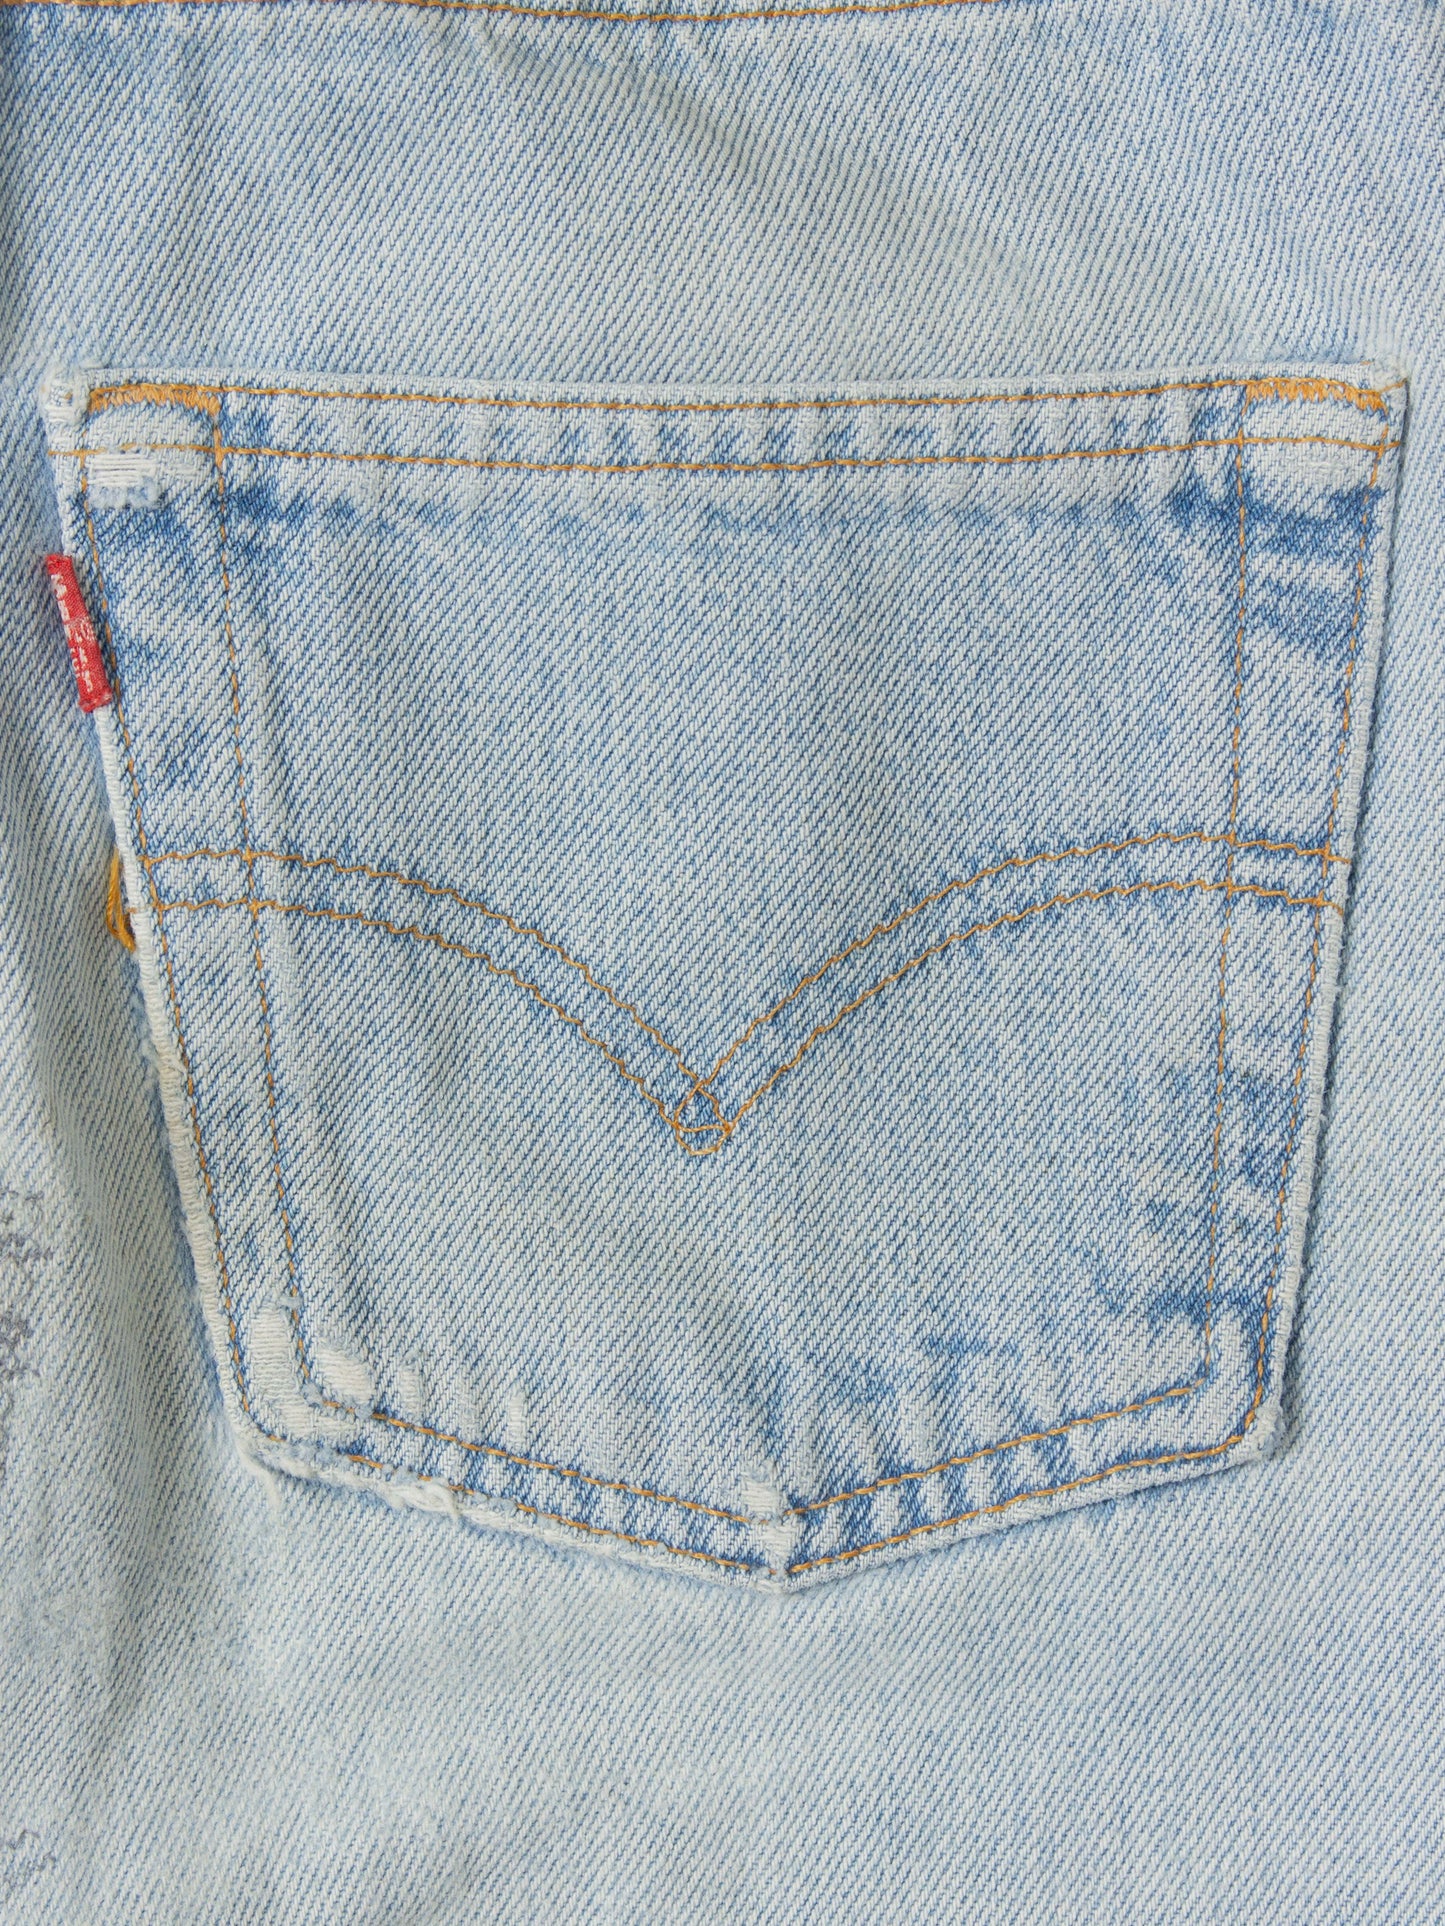 Vtg 1990s Levi's 501 - Made in USA (27x31)